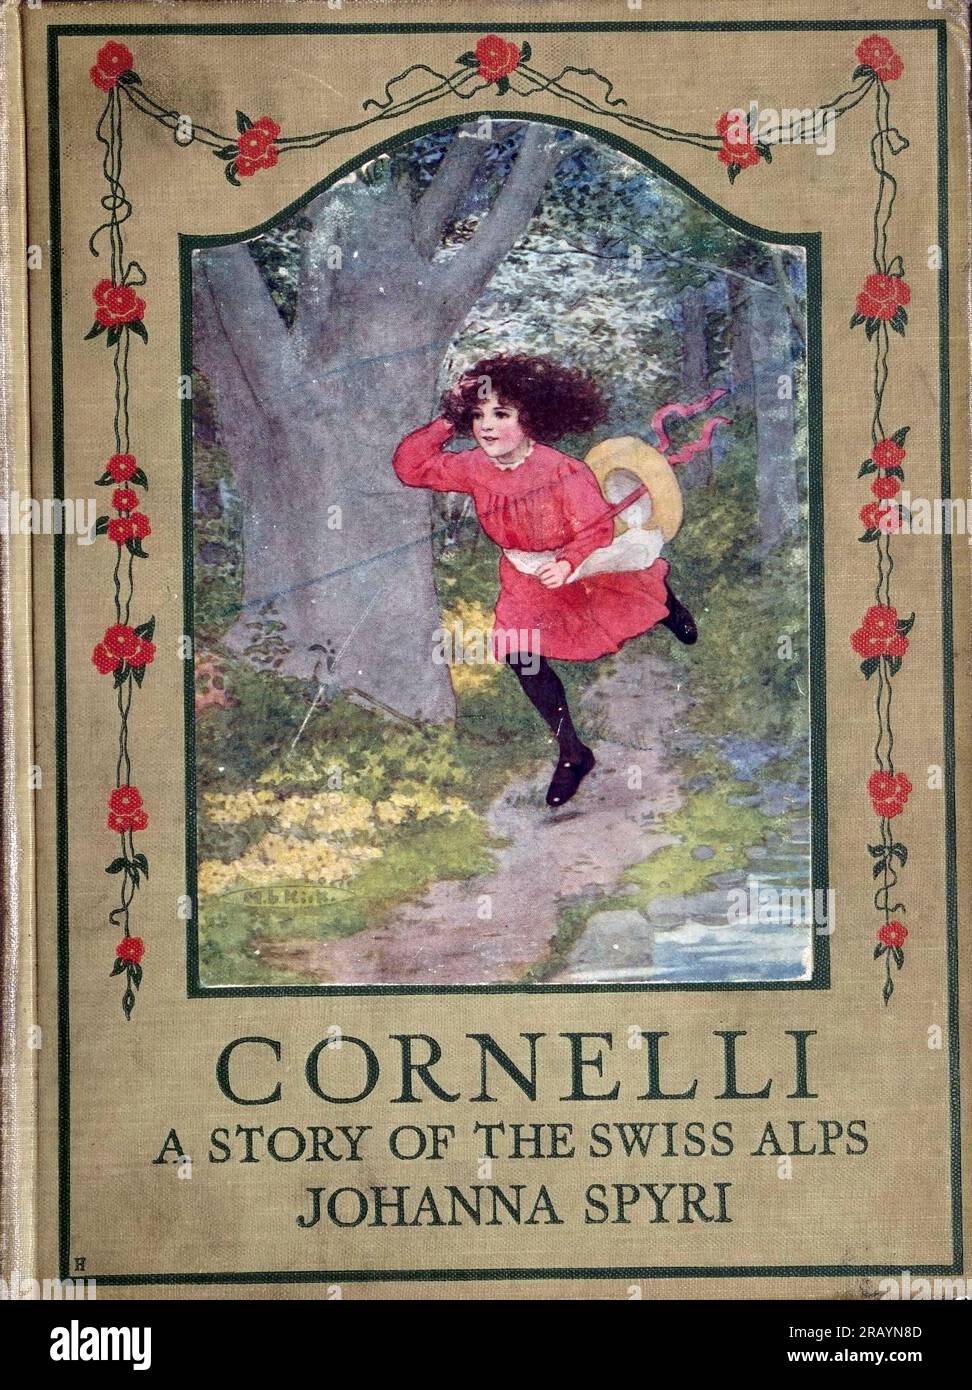 front cover illustrated by Maria L. Kirk from the book ' Cornelli; a story of the Swiss Alps ' by Spyri, Johanna, 1827-1901 Publication date 1921 Publisher Philadelphia, London, J.B. Lippincott company. Johanna Louise Spyri (12 June 1827 – 7 July 1901) was a Swiss author of novels, notably children's stories. She wrote the popular book Heidi. Born in Hirzel, a rural area in the canton of Zürich, as a child she spent several summers near Chur in Graubünden, the setting she later would use in her novels. Stock Photo